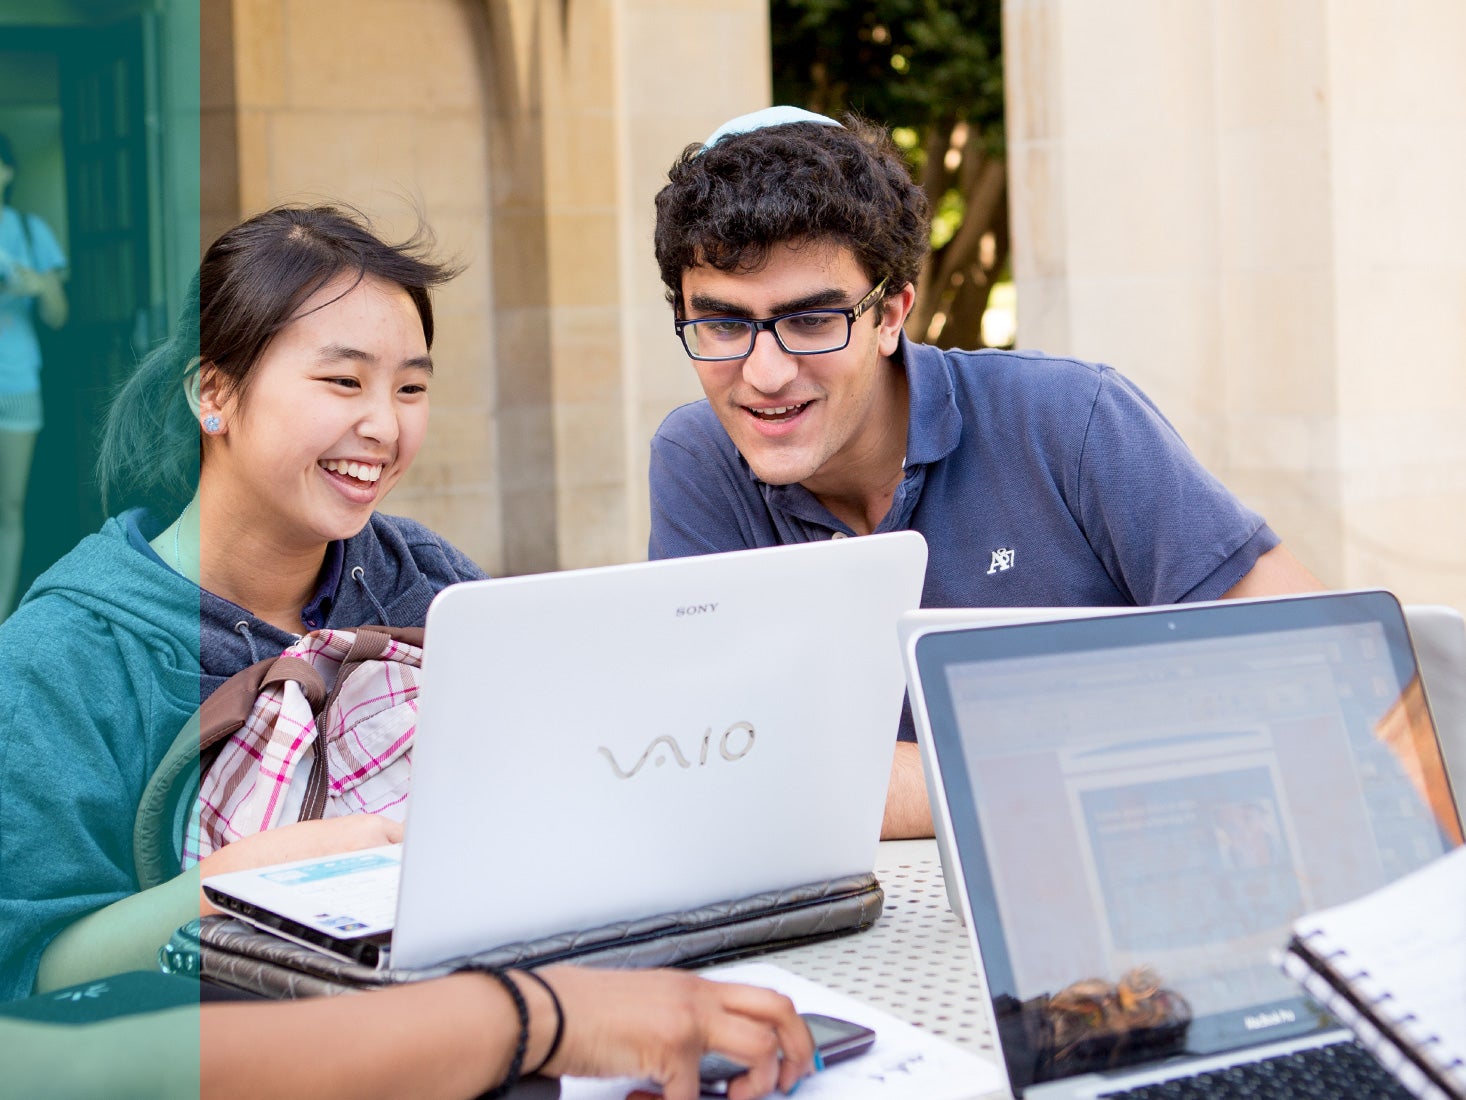 Several students study and have fun at an outdoor table.